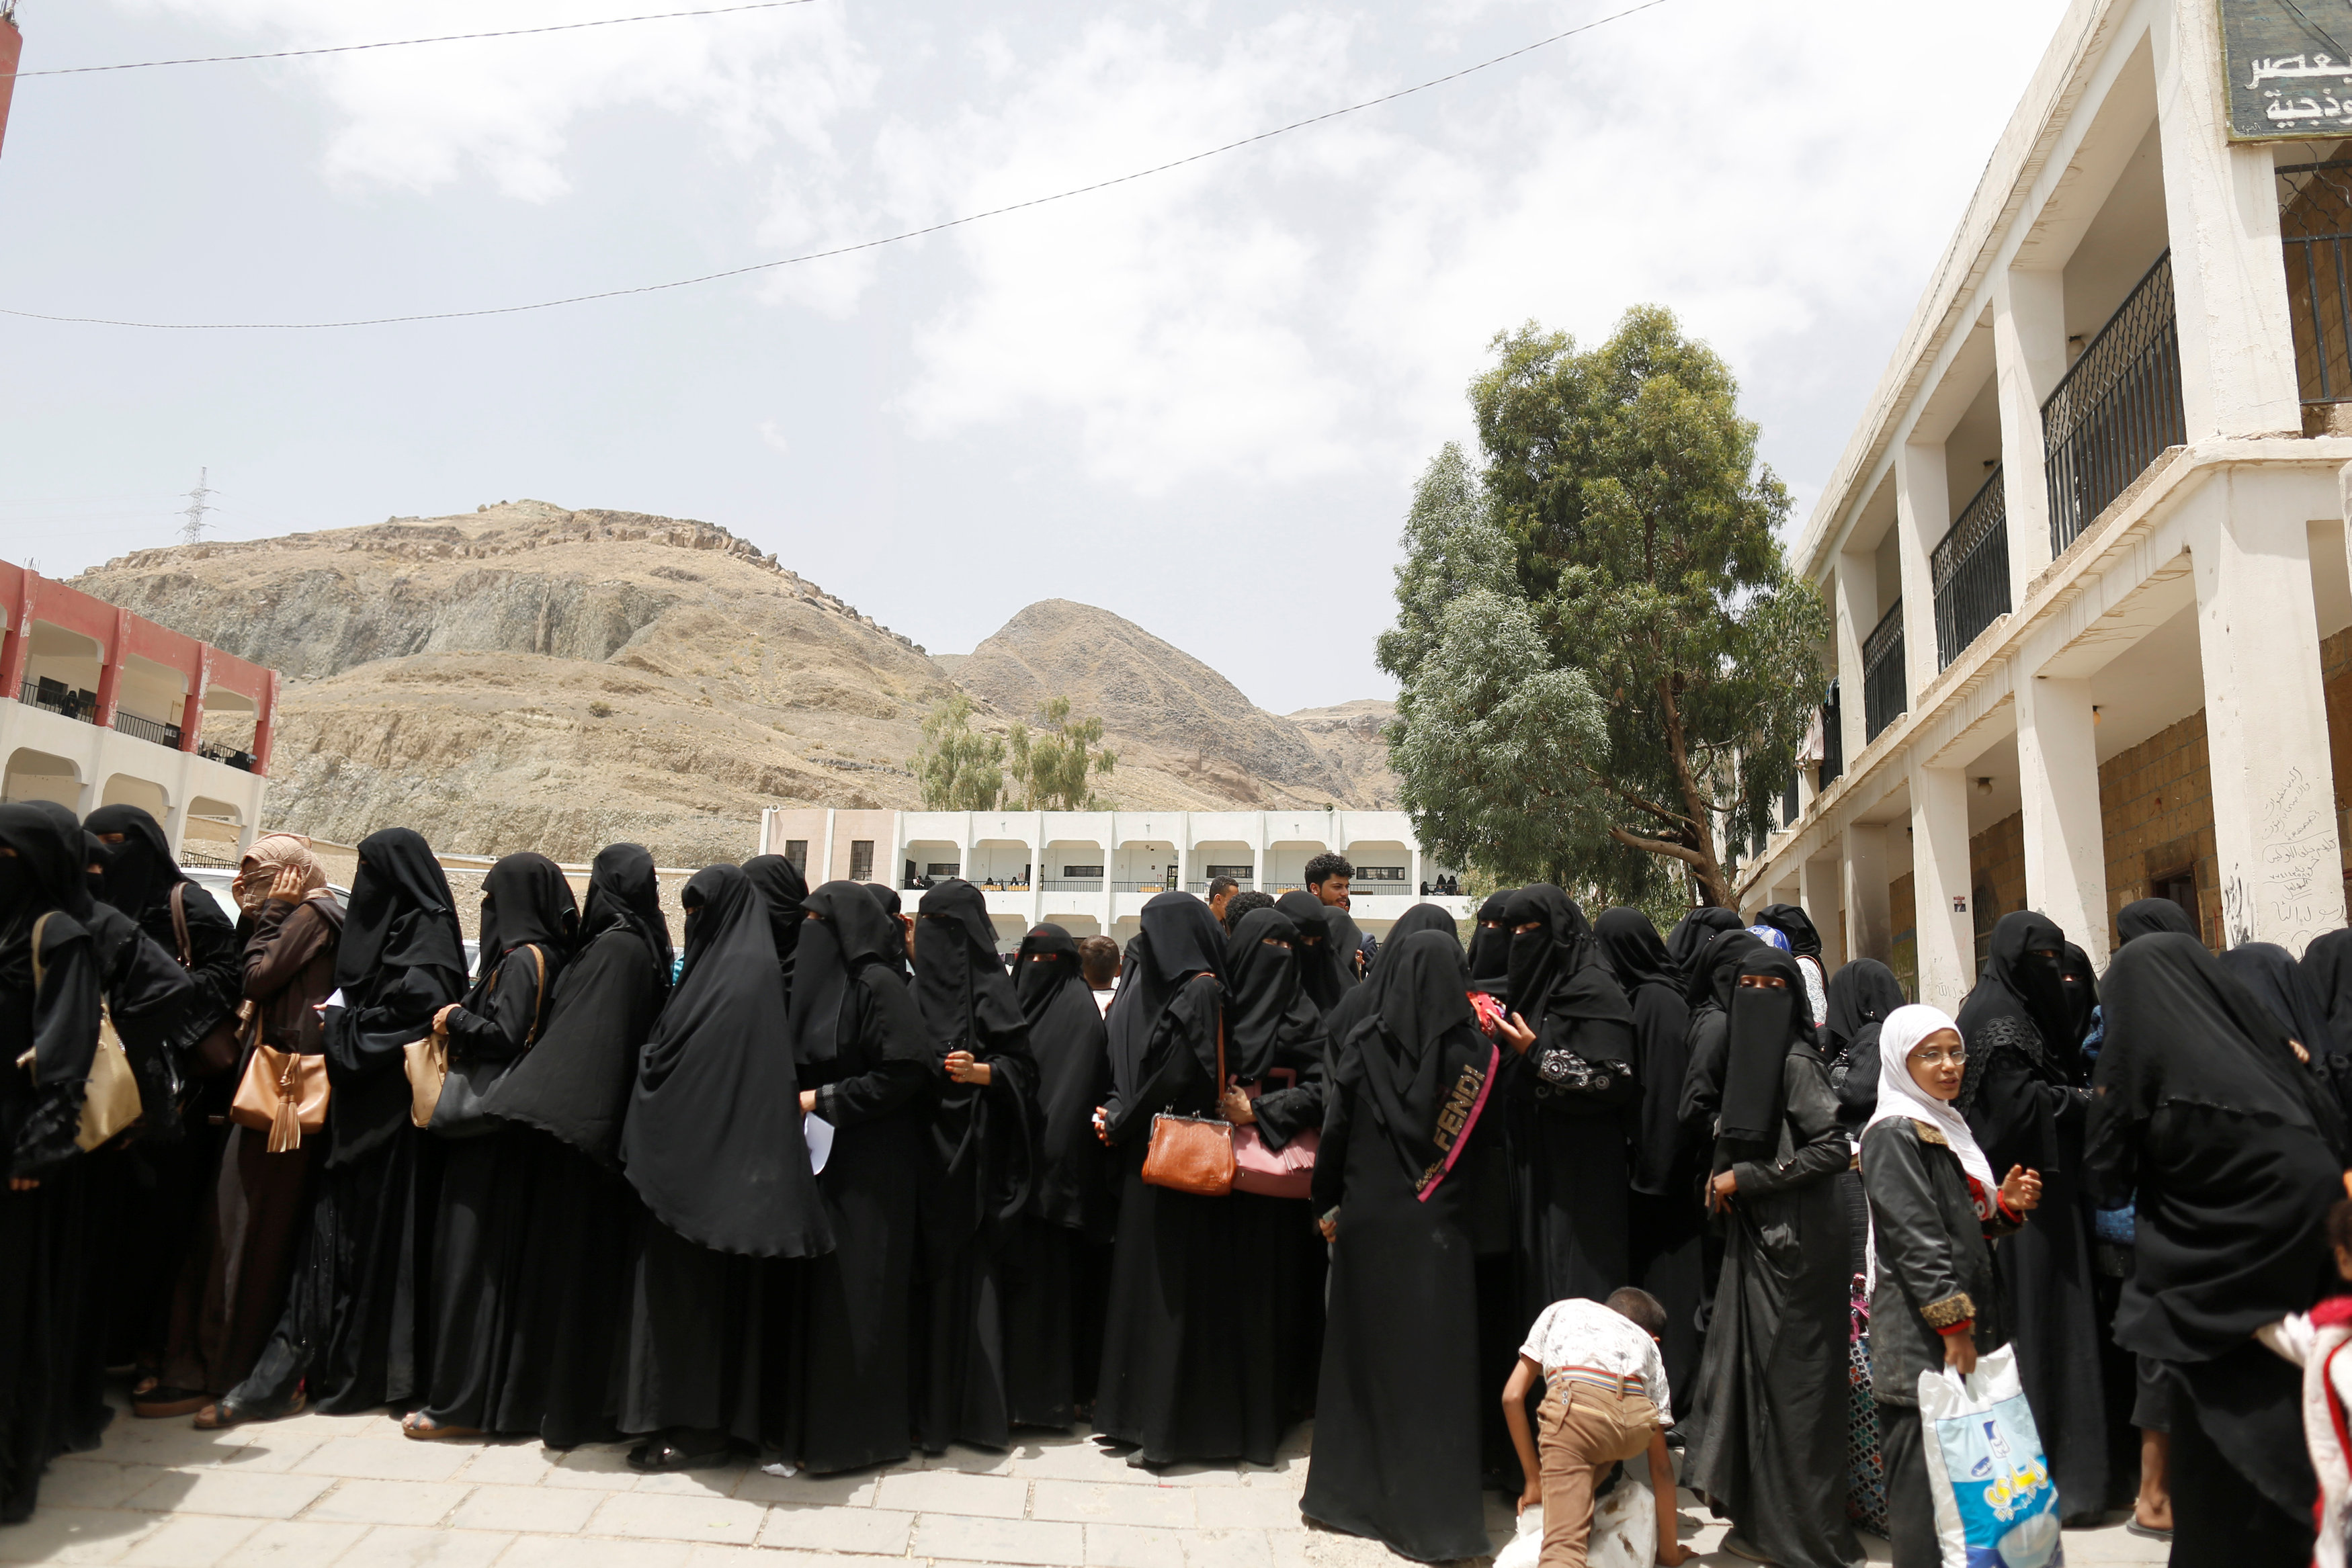 Women displaced by the fighting in the Red Sea port city of Hodeidah queue to register in a school allocated for IDPs in Sanaa, Yemen